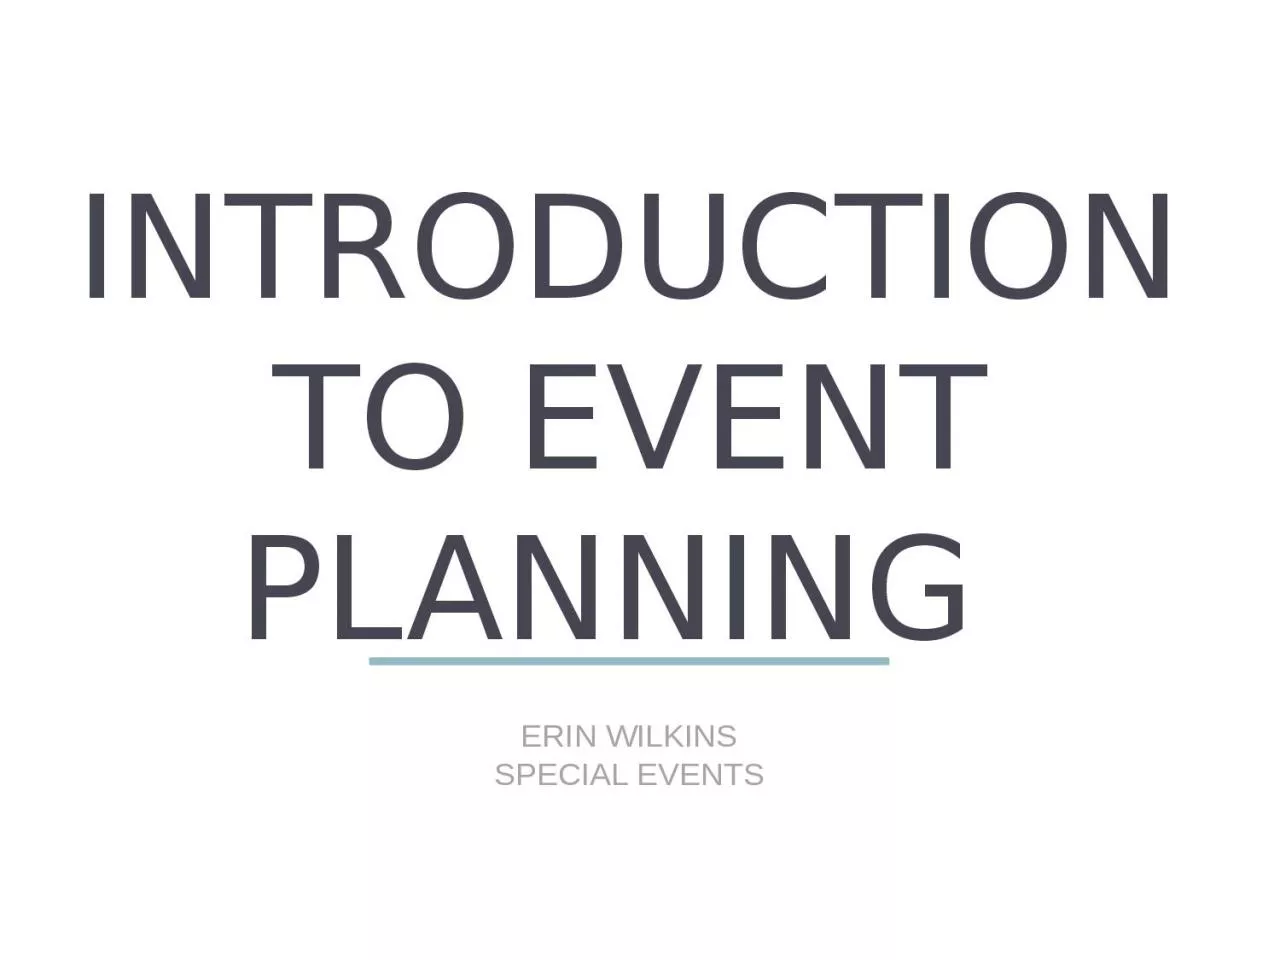 INTRODUCTION TO EVENT PLANNING